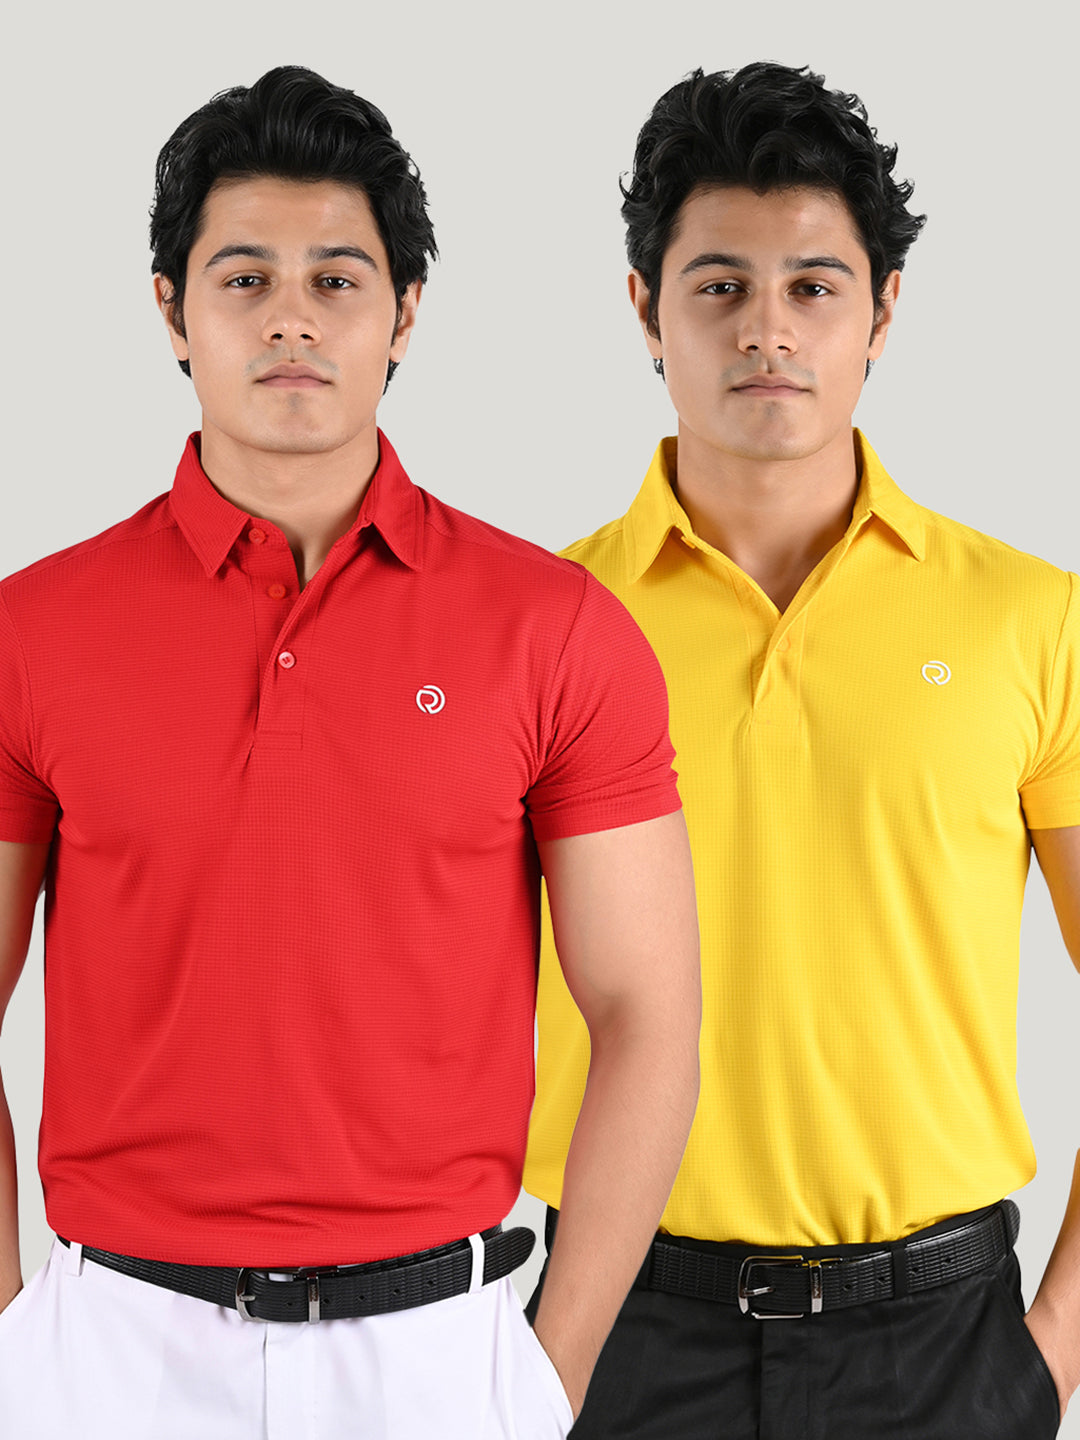 Performance Sports Collar Tshirt - Pack of 2 Red & Yellow